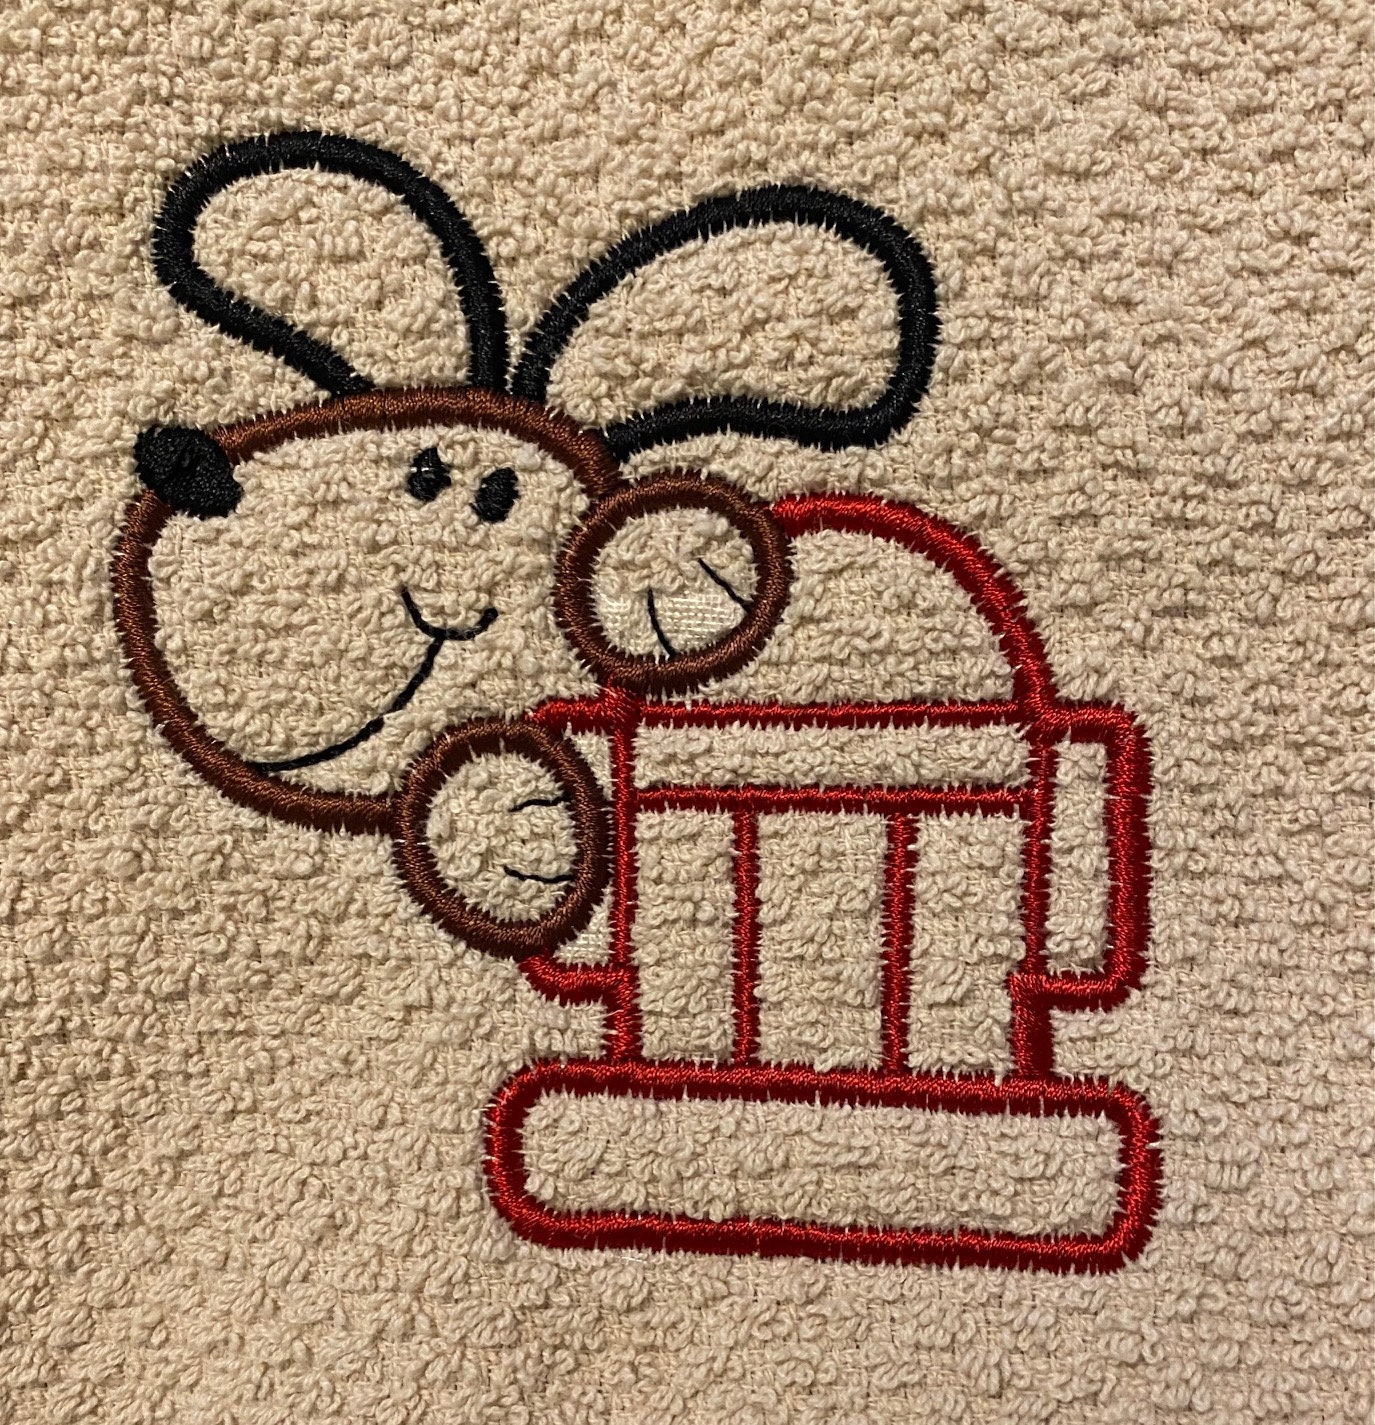 Hanging kitchen towel with embroidered Dog and Fire-hydrant outlines embroidered on towel